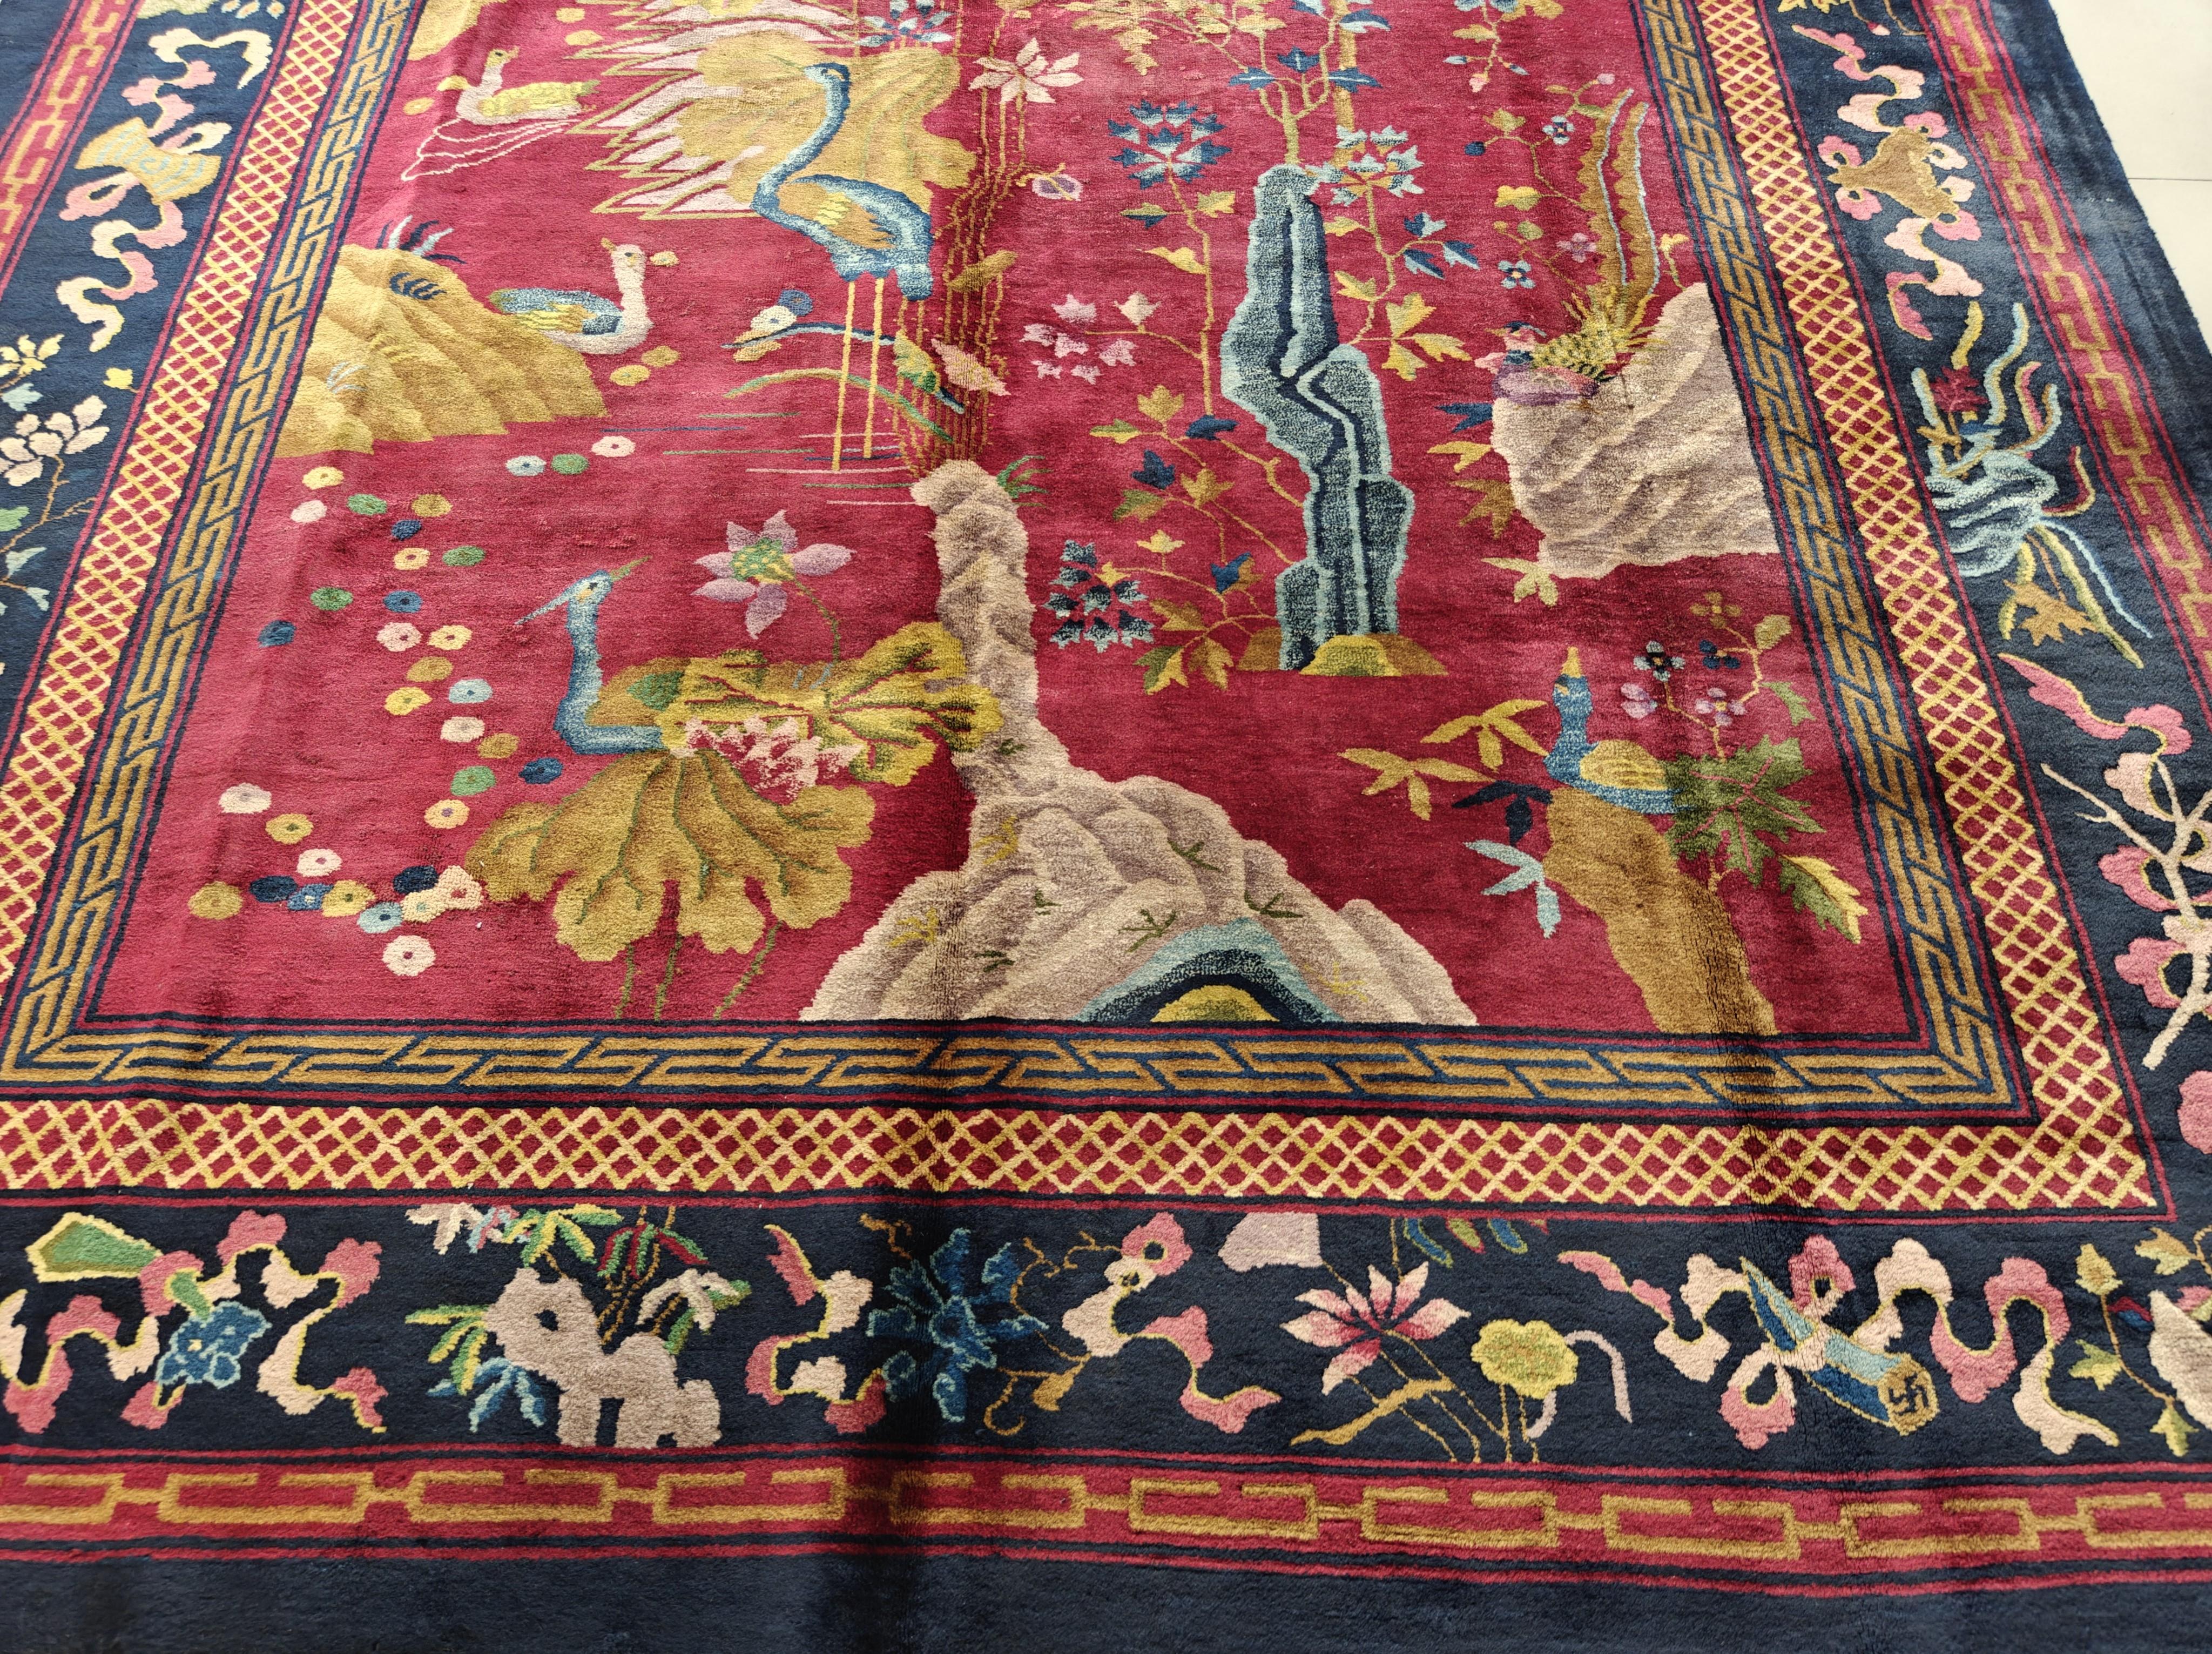 1920s Chinese Art Deco Carpet ( 9' x 14' - 274 x 427 ) For Sale 1